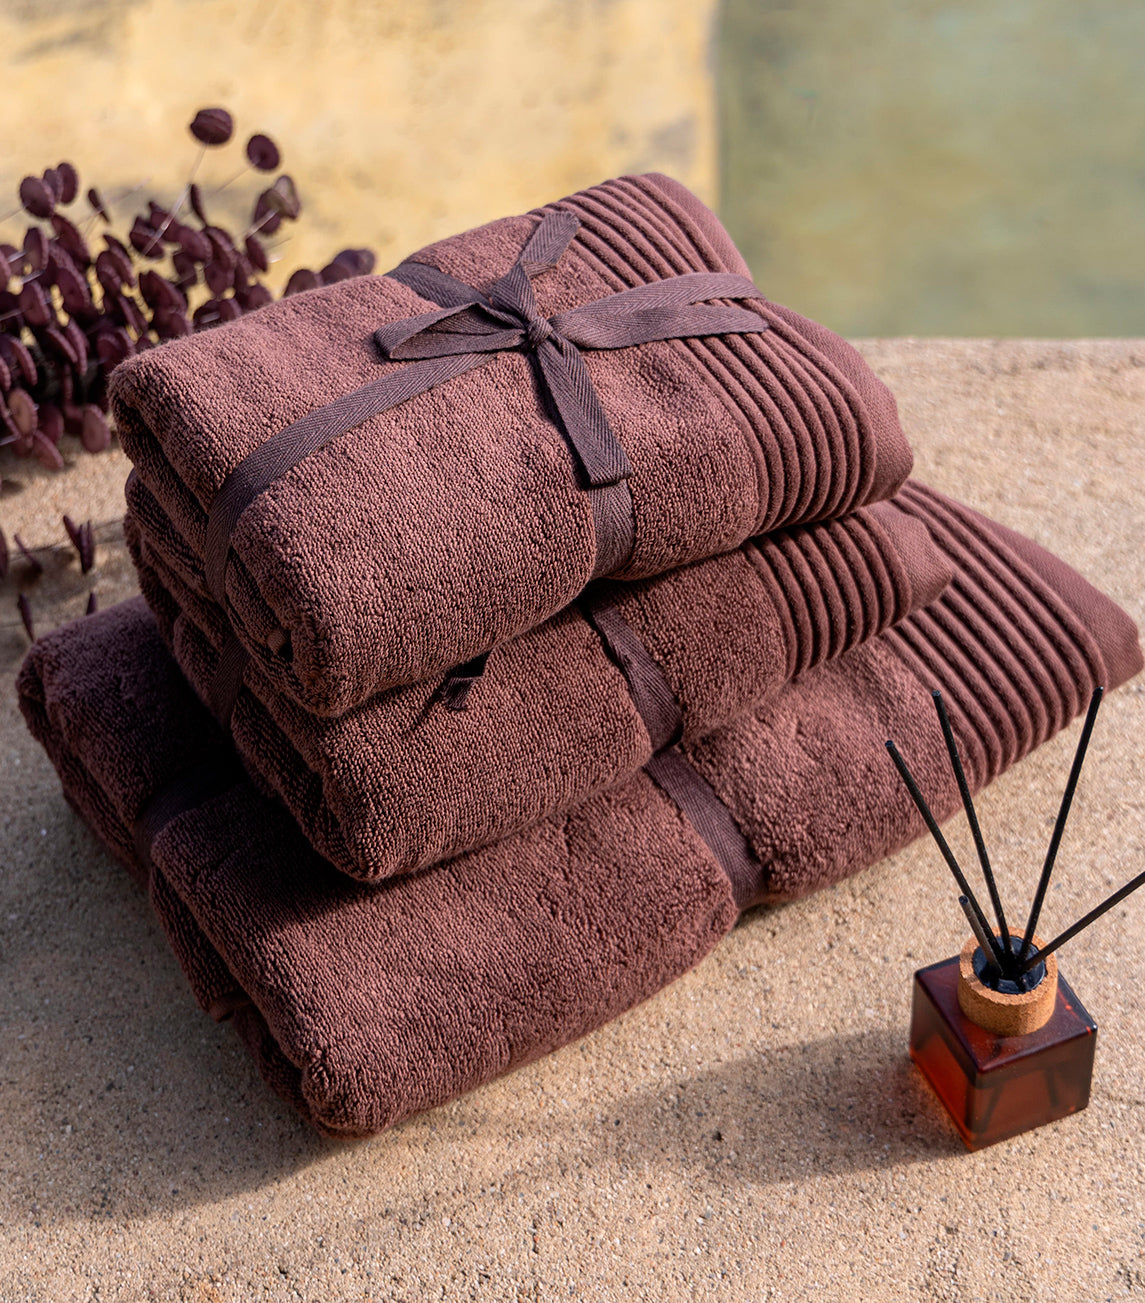 Chocolate Embrace Fluffy Bath Towel - Indulge in the rich comfort of this decadent chocolate-colored bath towel. Luxuriously soft and absorbent, perfect for wrapping yourself in after a soothing bath or shower. 